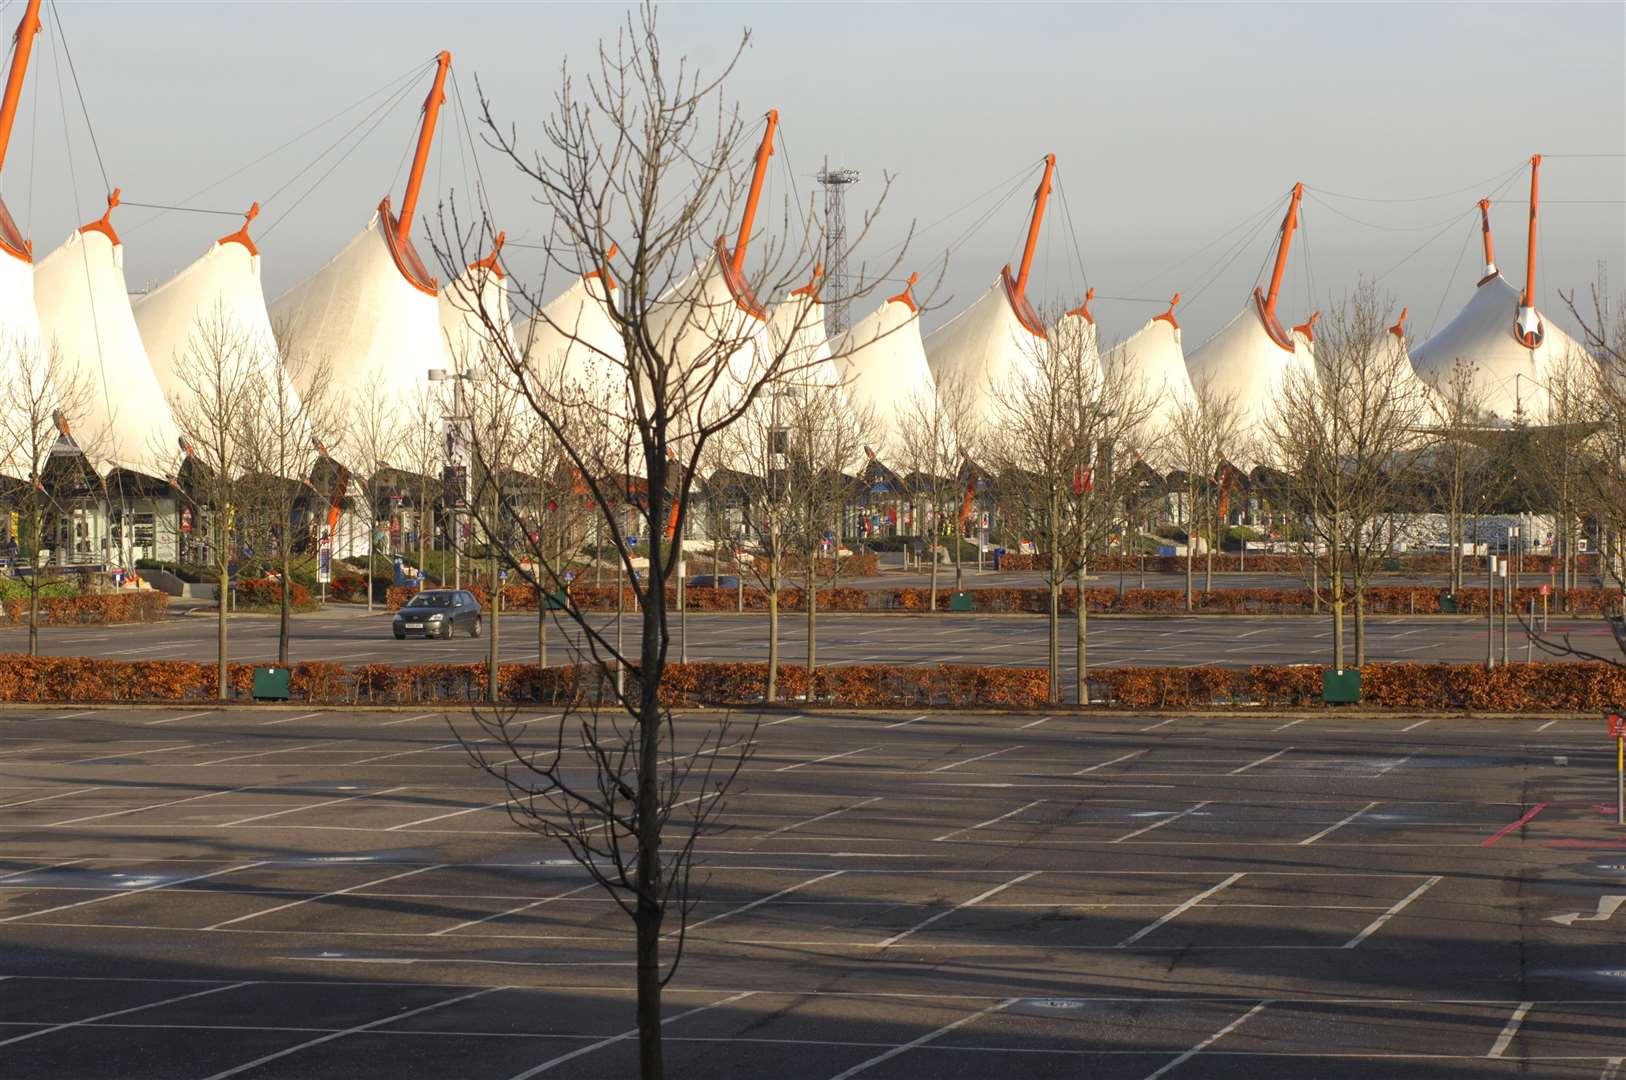 The Ashford Designer Outlet in 2010. Picture: Martin Apps